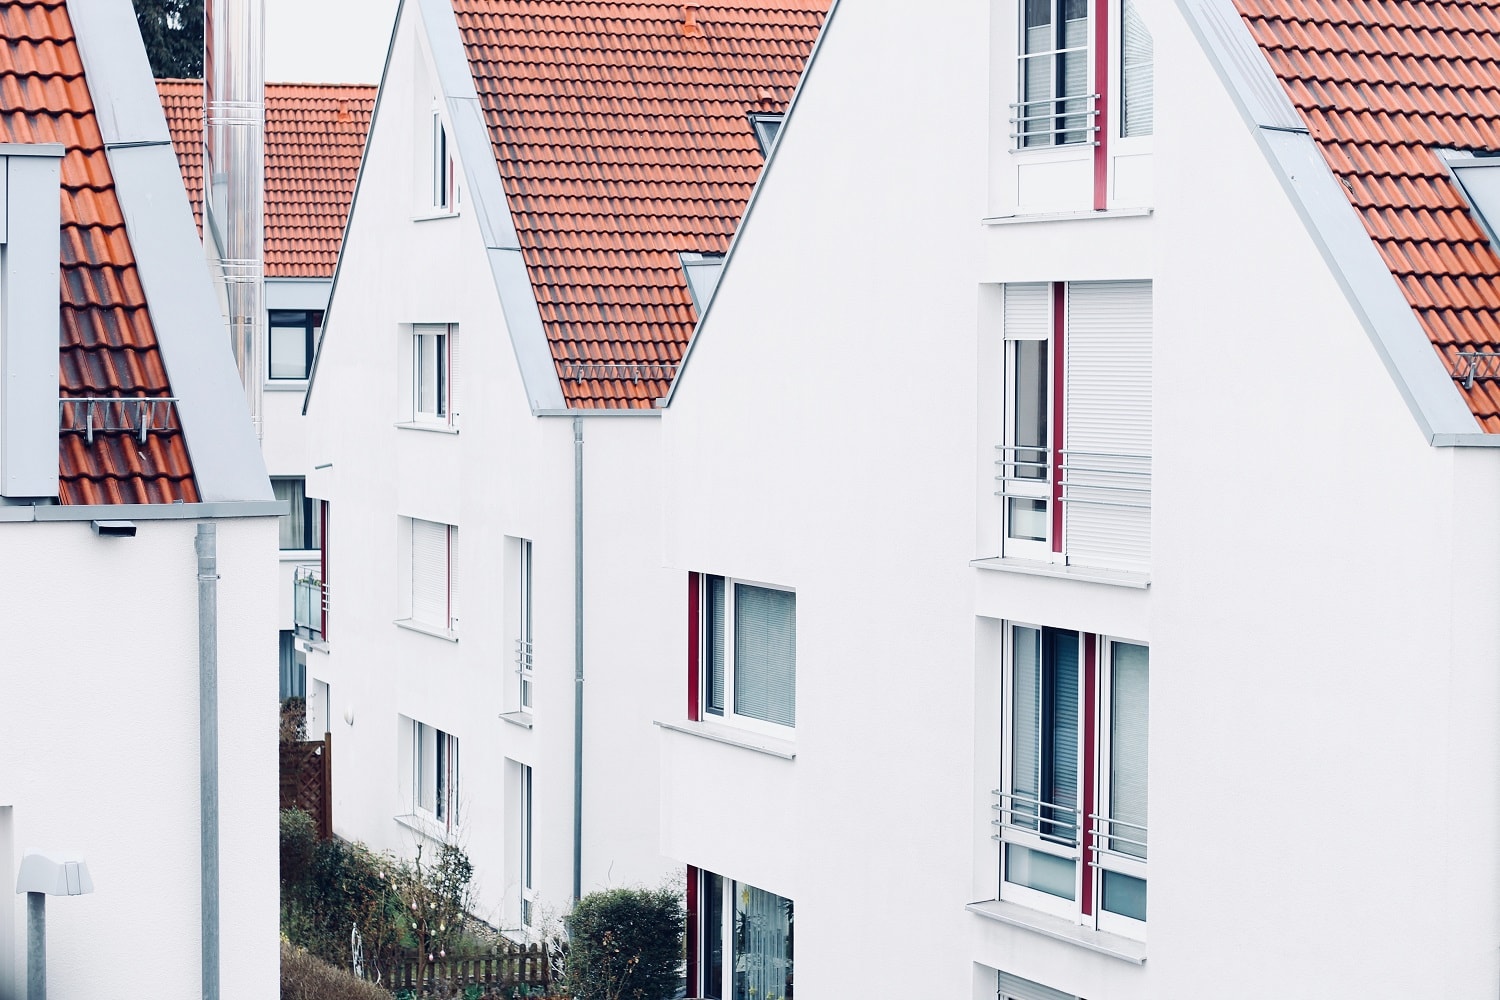 white-homes-together-red-roofs